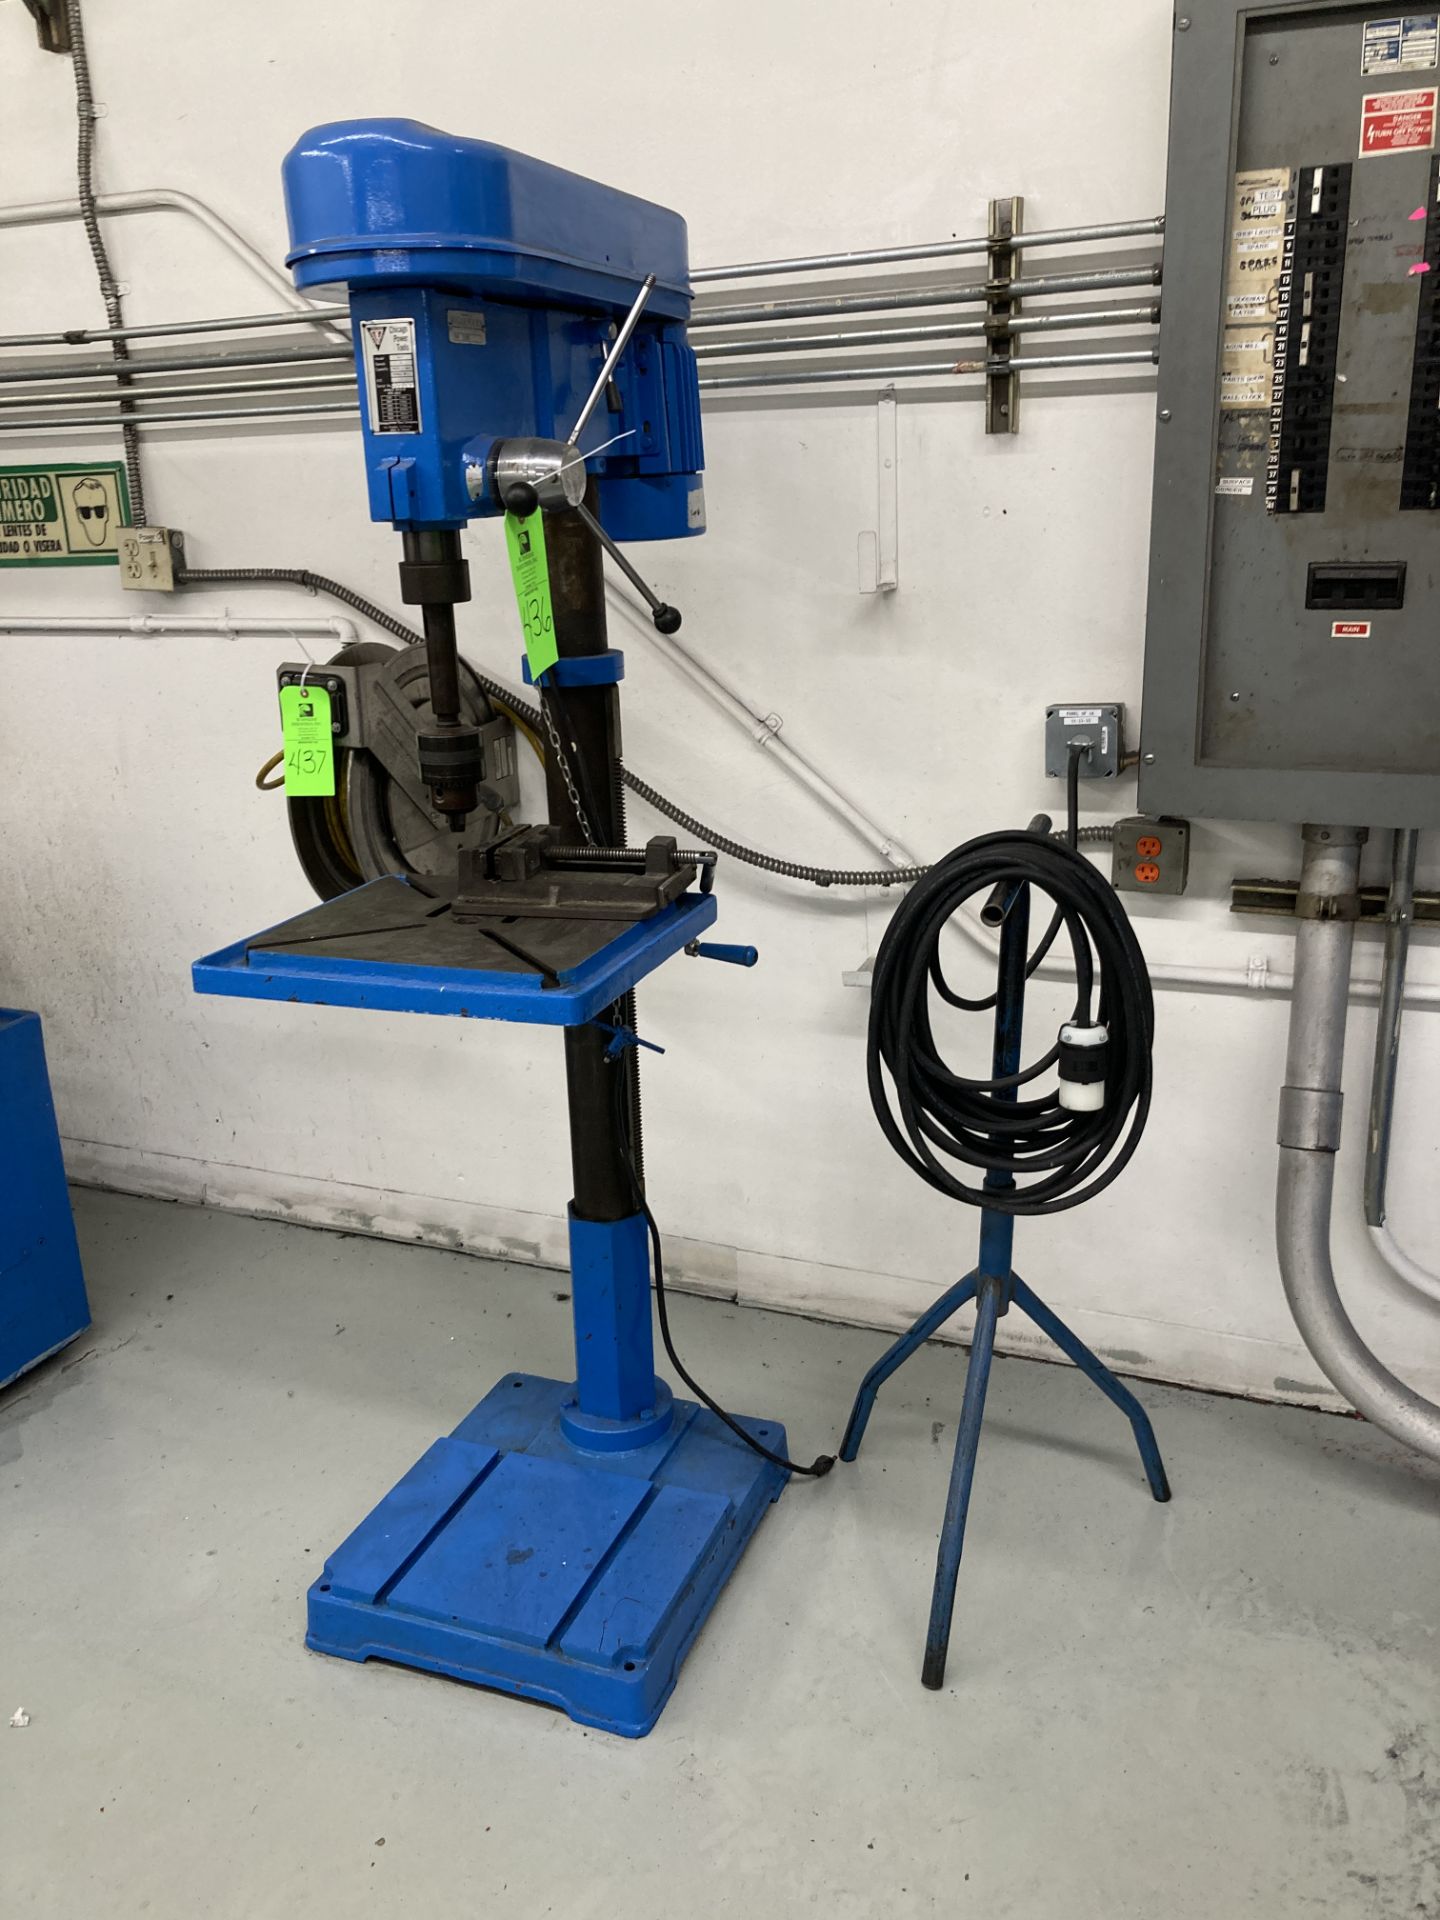 Chicago Power Tools drill press, model A1-27, 12 speed, 3/4 in chuck, 115 vac Rigging Fee: $ 200